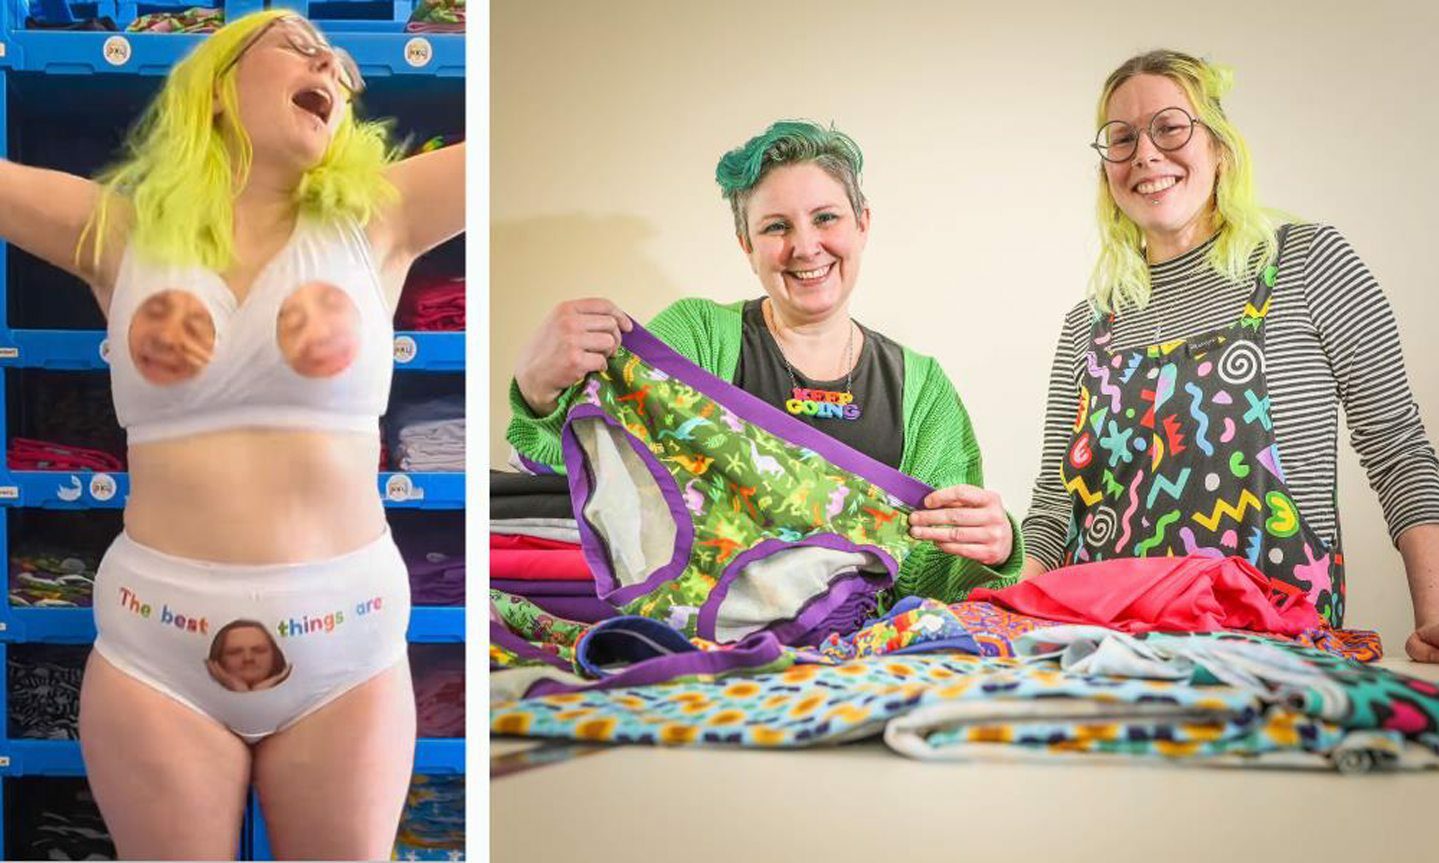 Perth firm Molke goes viral with Lewis Capaldi bra and pants